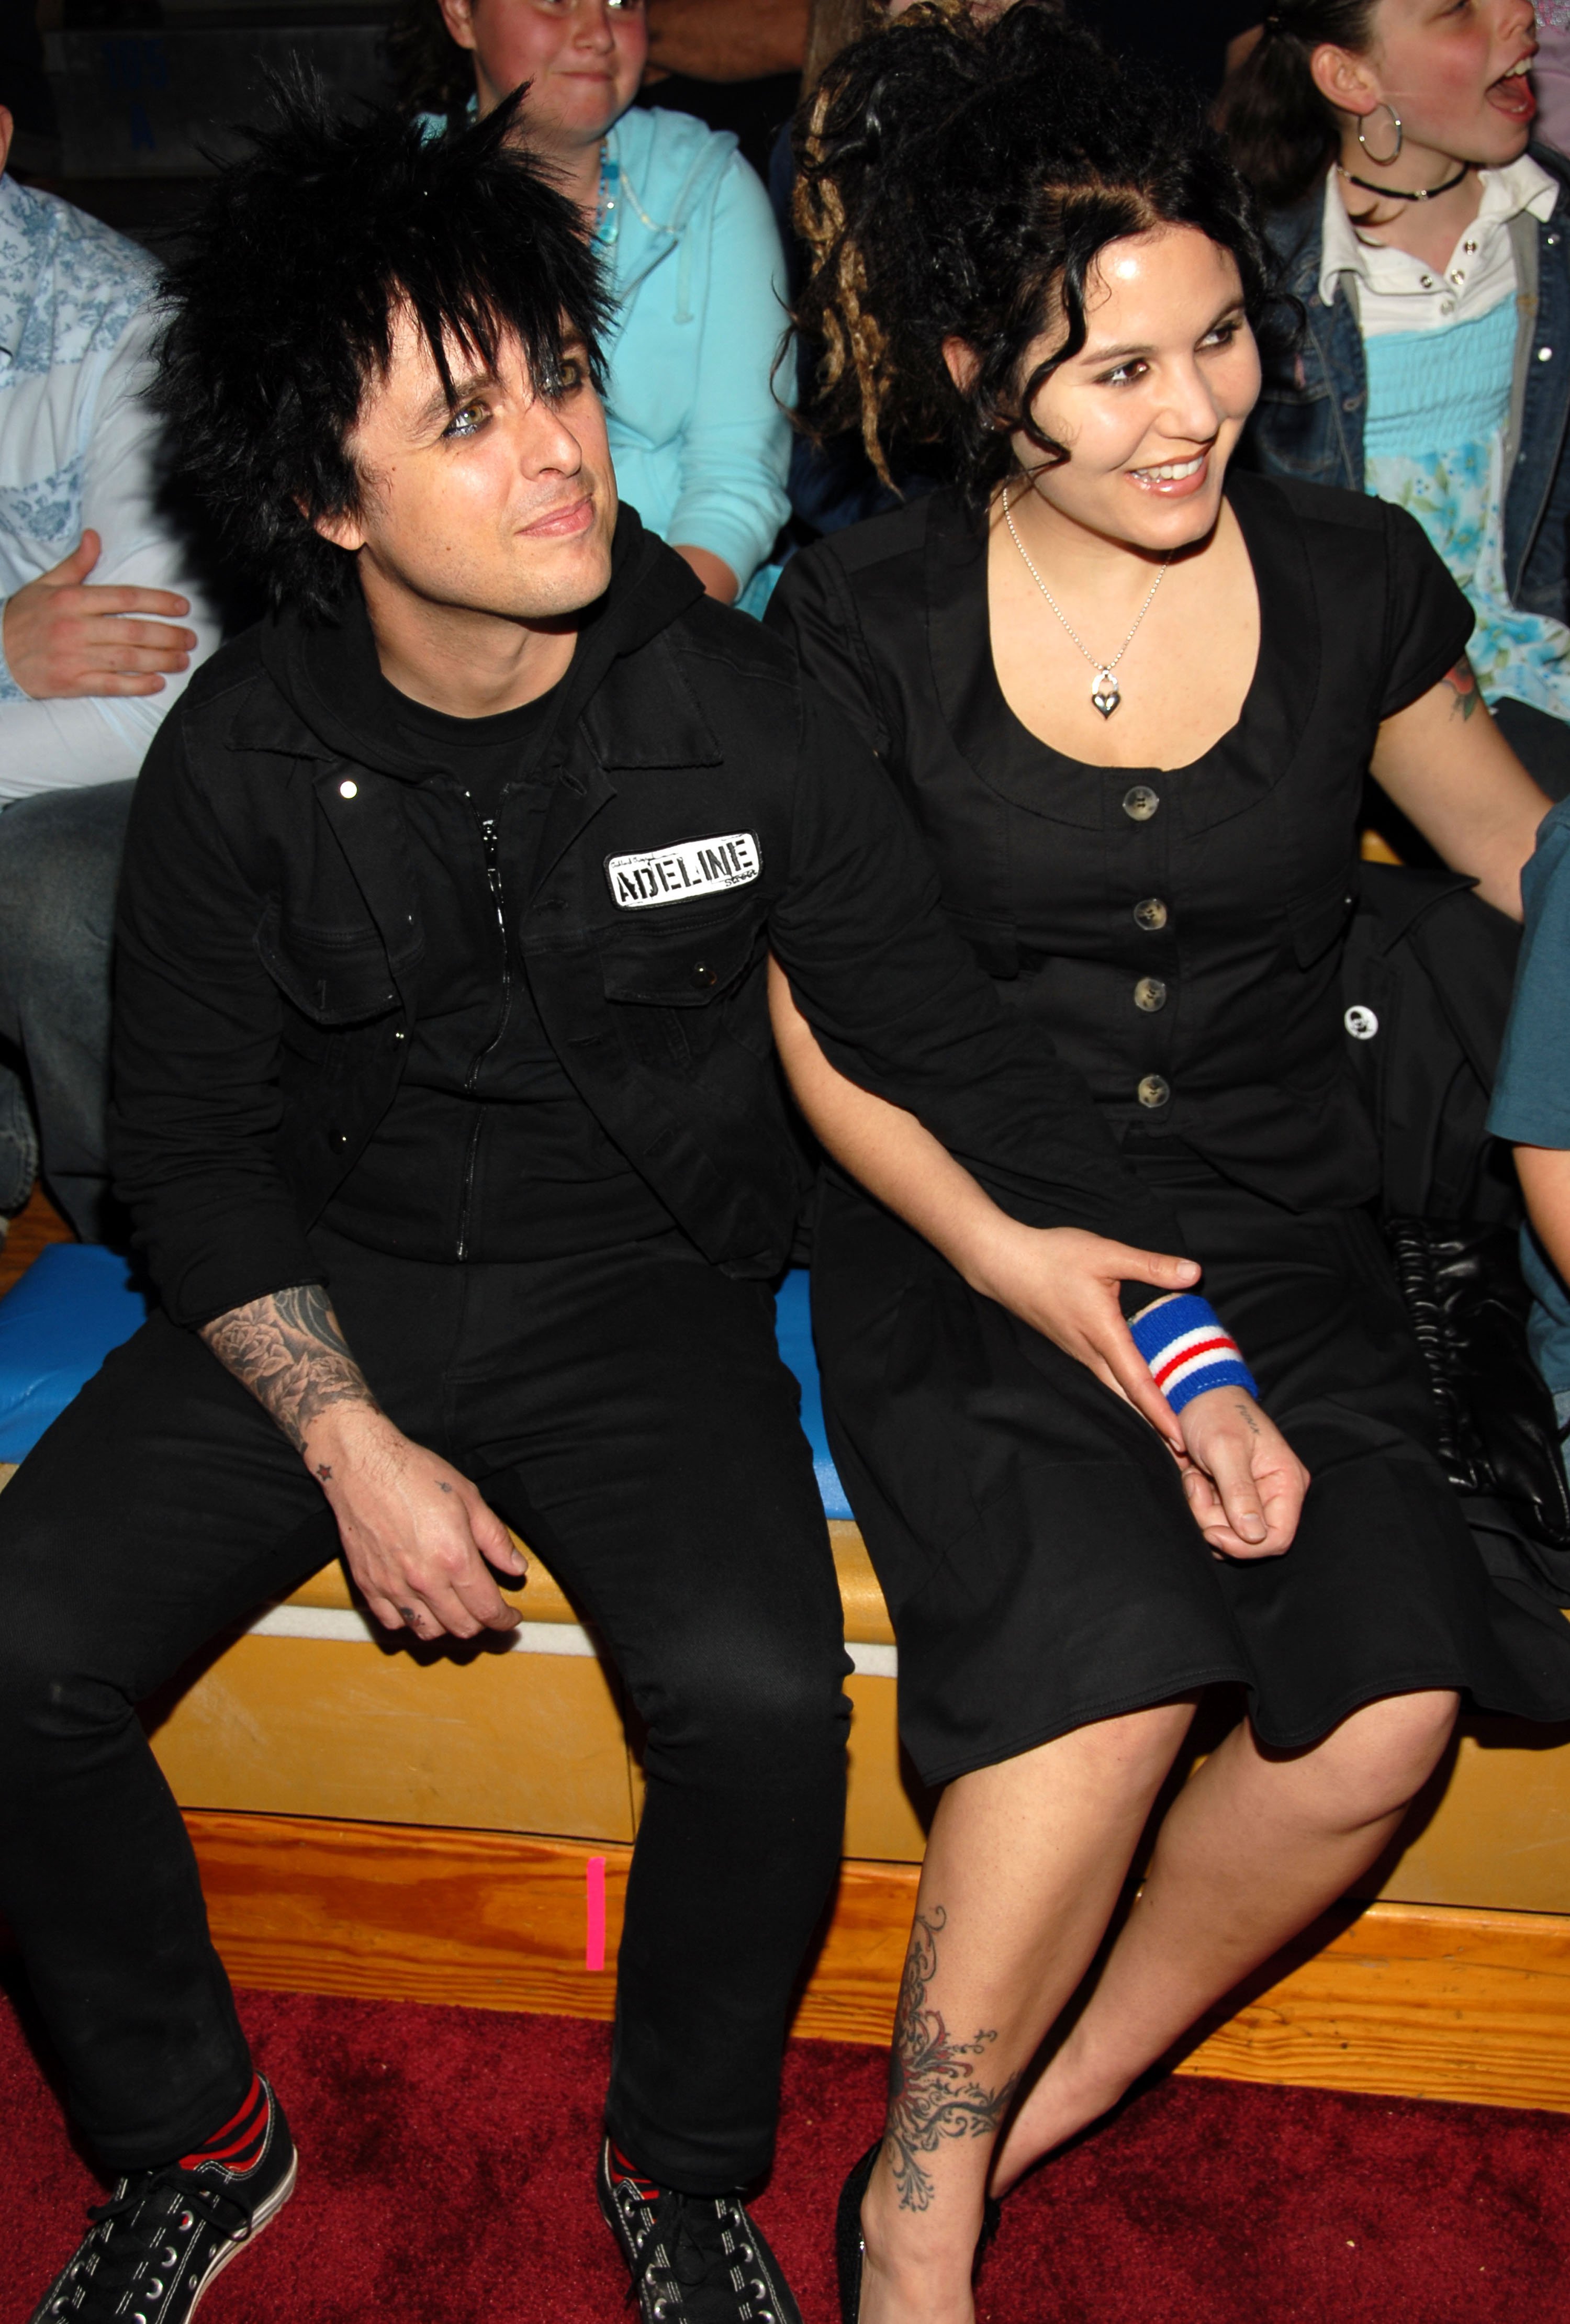 Billie Joe Armstrong and Adrienne Nesser are pictured at Nickelodeon's 19th Annual Kids' Choice Awards on an unspecified date | Source: Getty Images